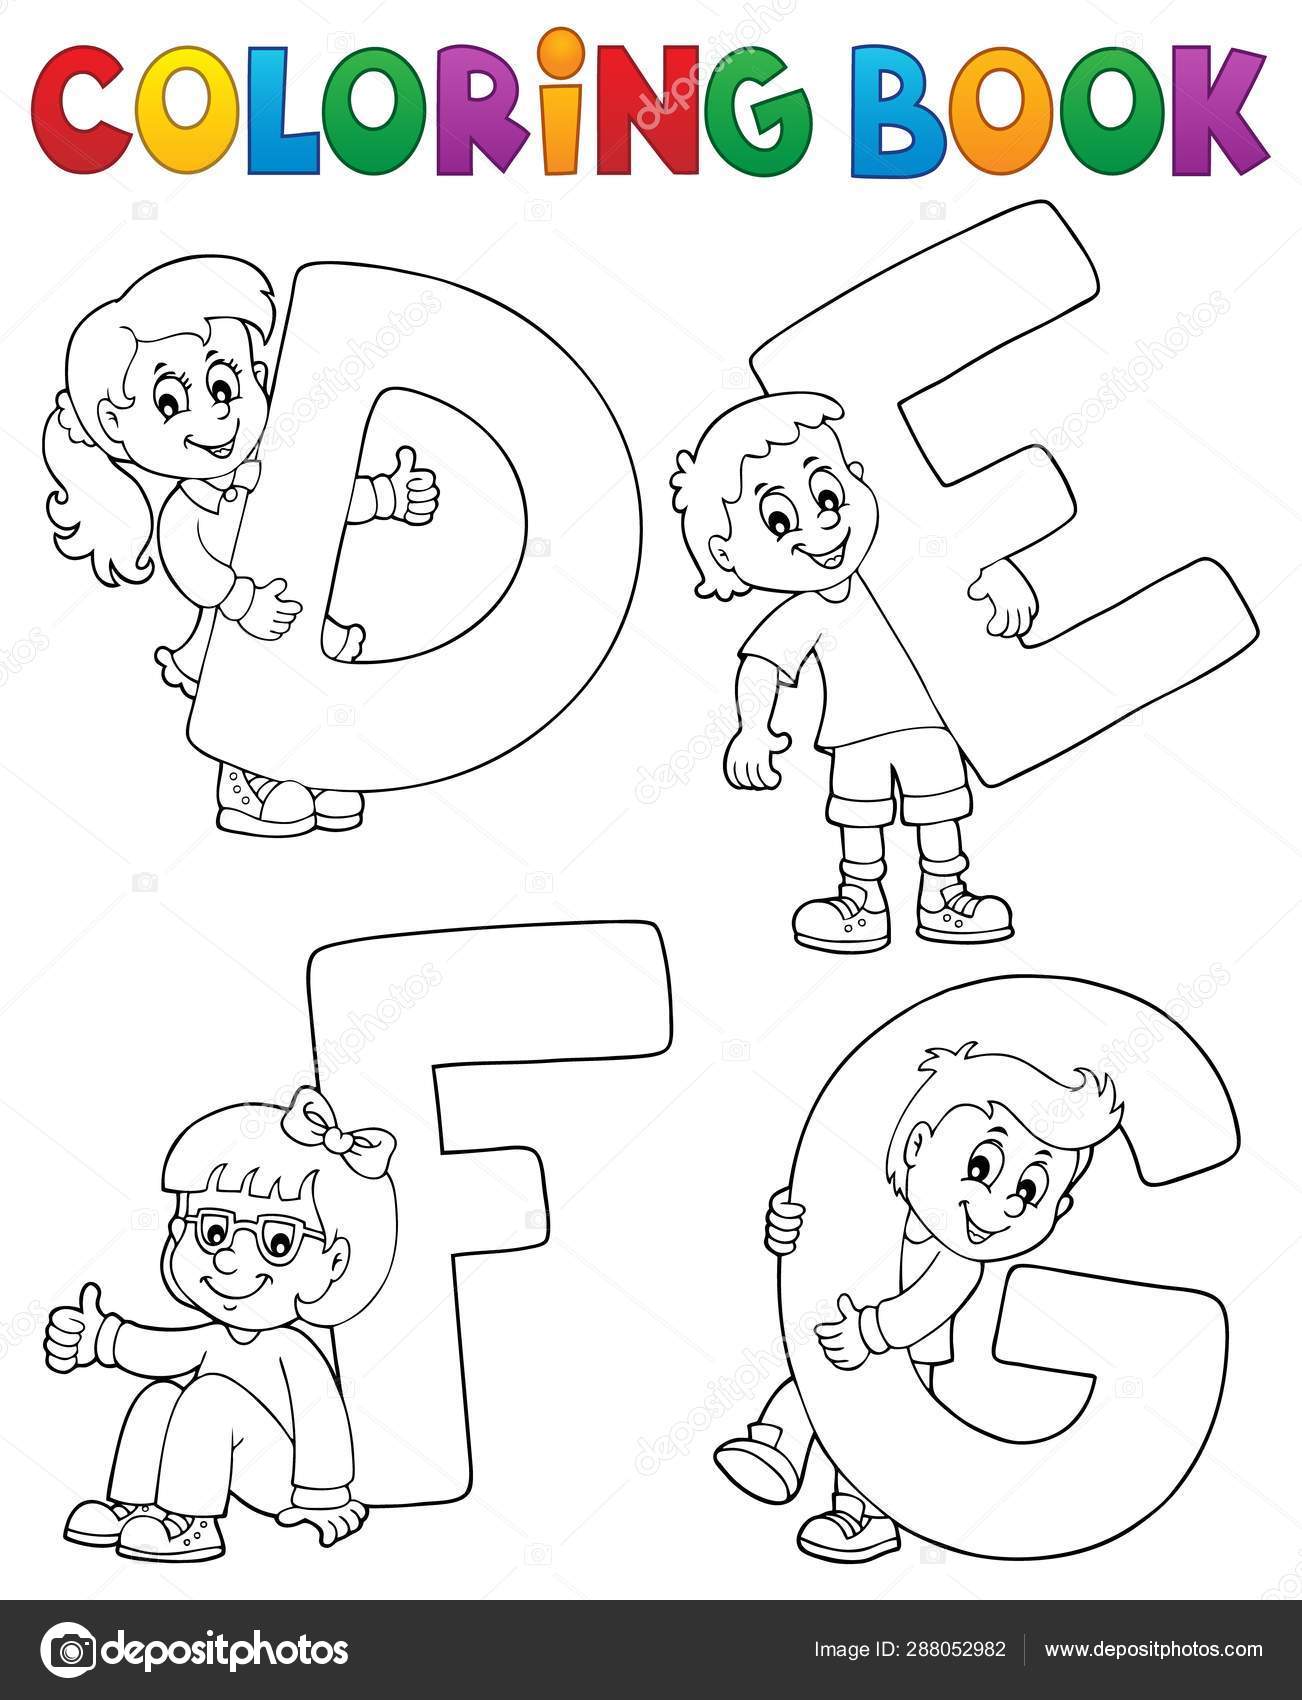 Download Coloring Book Children With Letters Defg Vector Image By C Clairev Vector Stock 288052982